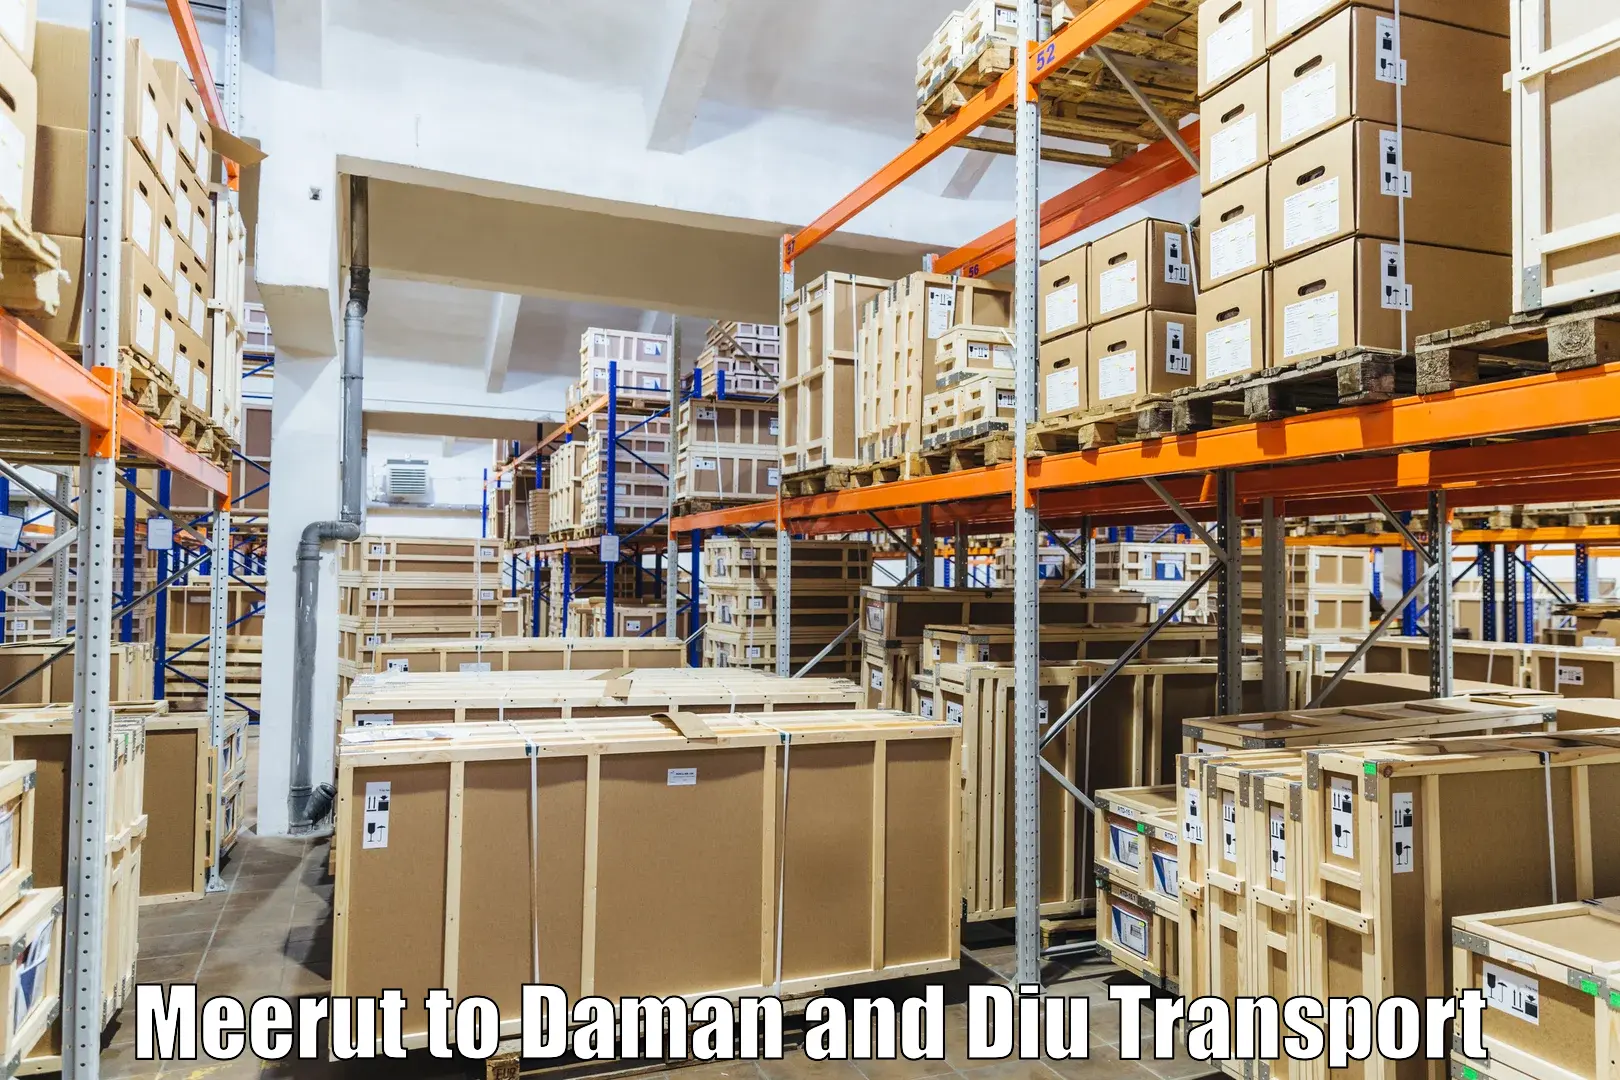 Container transport service Meerut to Daman and Diu